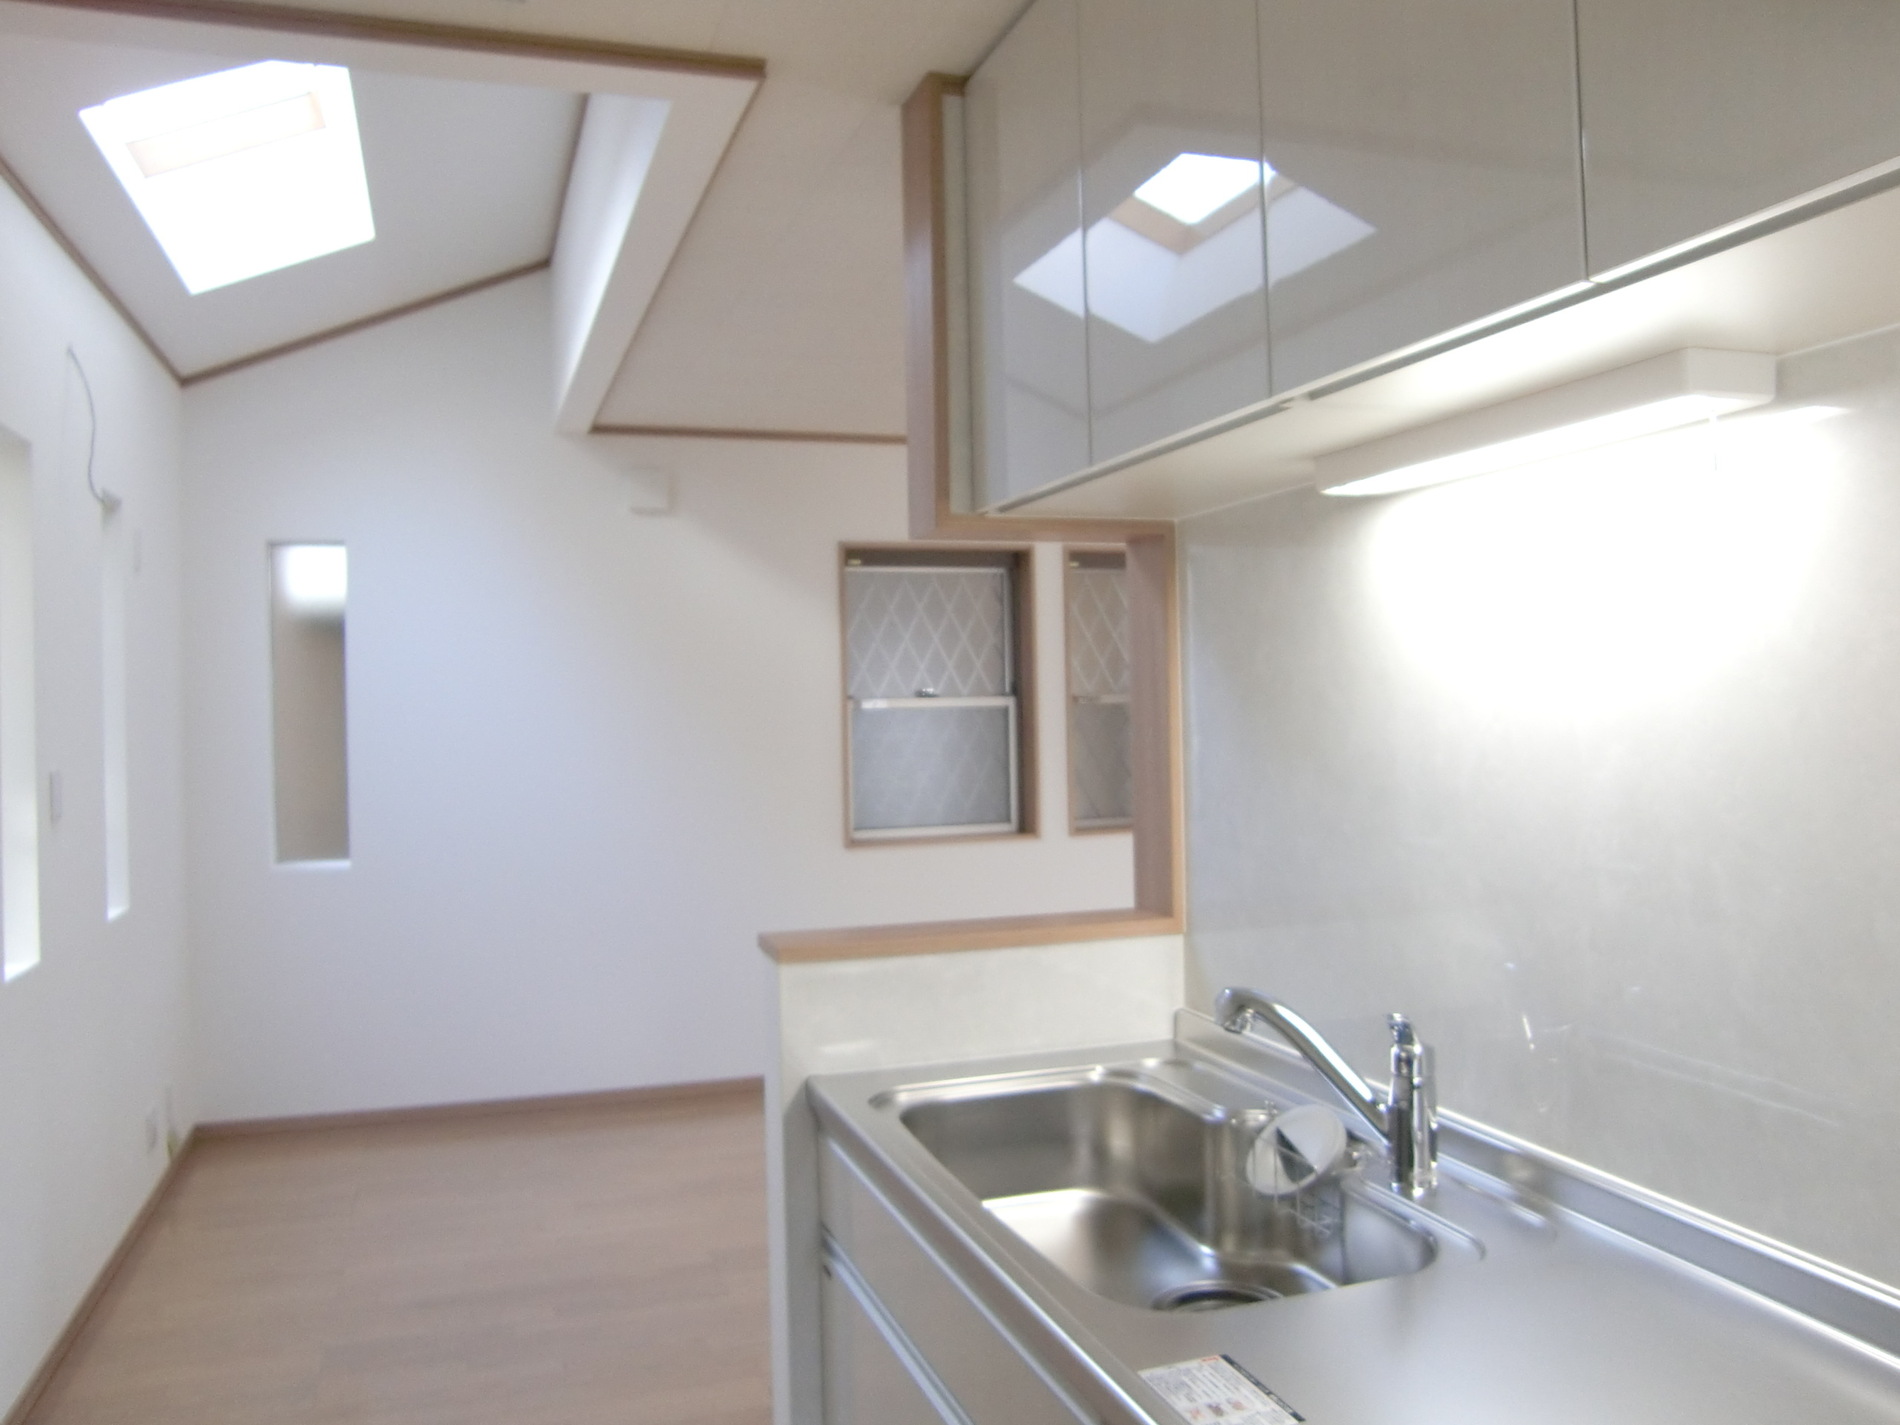 Kitchen. While located on the north side, Also ensure adequate lighting by installing a skylight. System kitchen equipped with a dishwasher, glass top stove. The foot also floor heating (No. 6 locations)